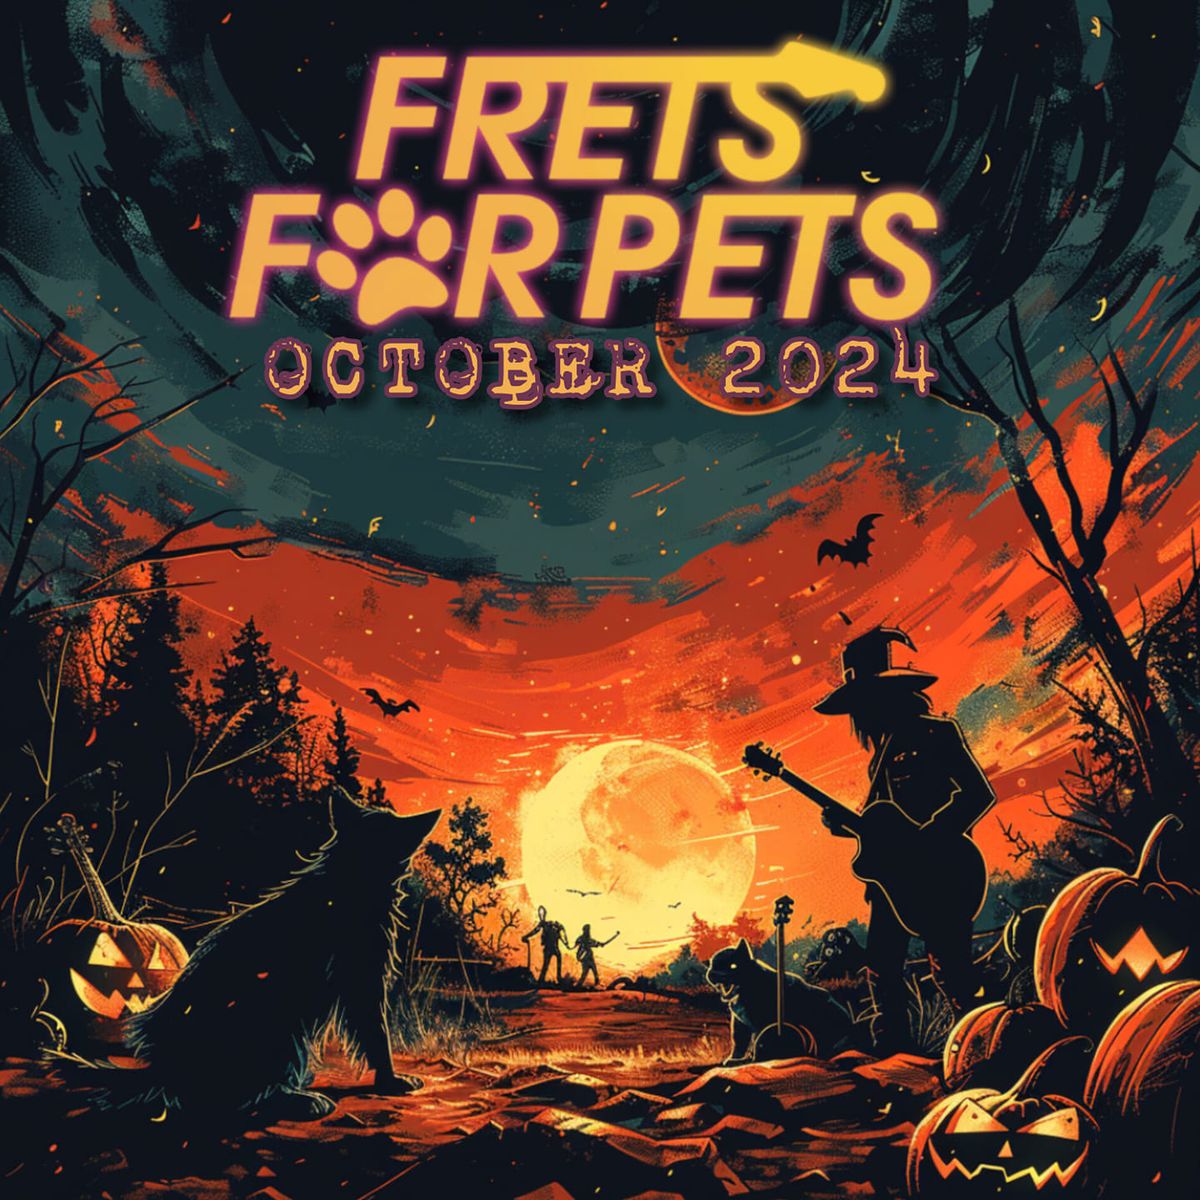 Frets For Pets 2024